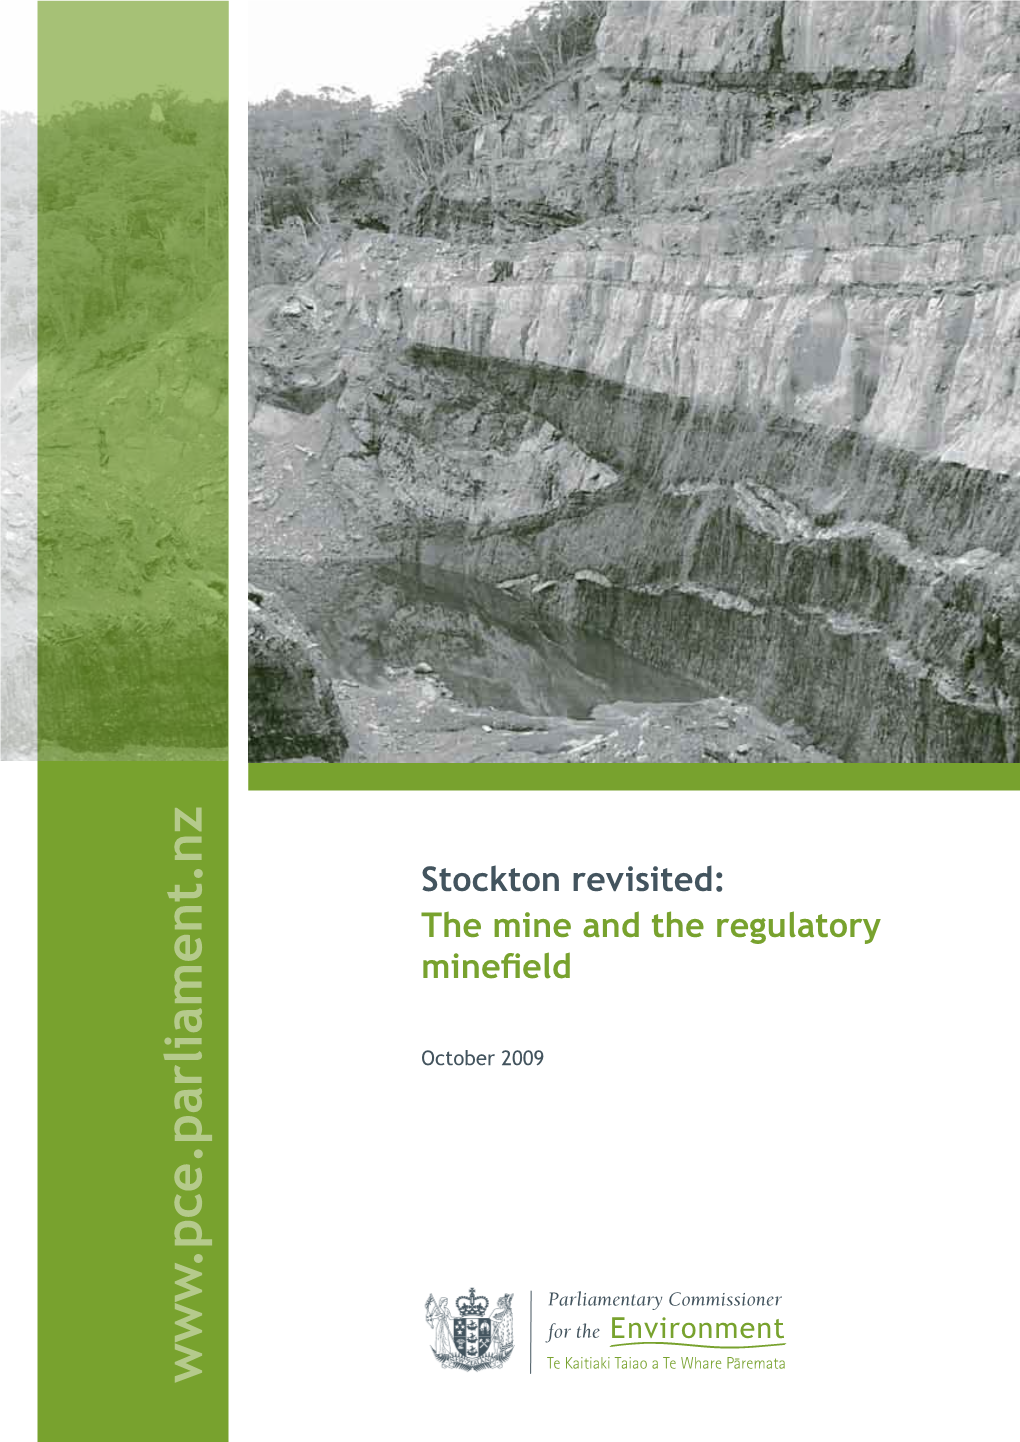 Stockton Revisited: the Mine and Regulatory Minefield